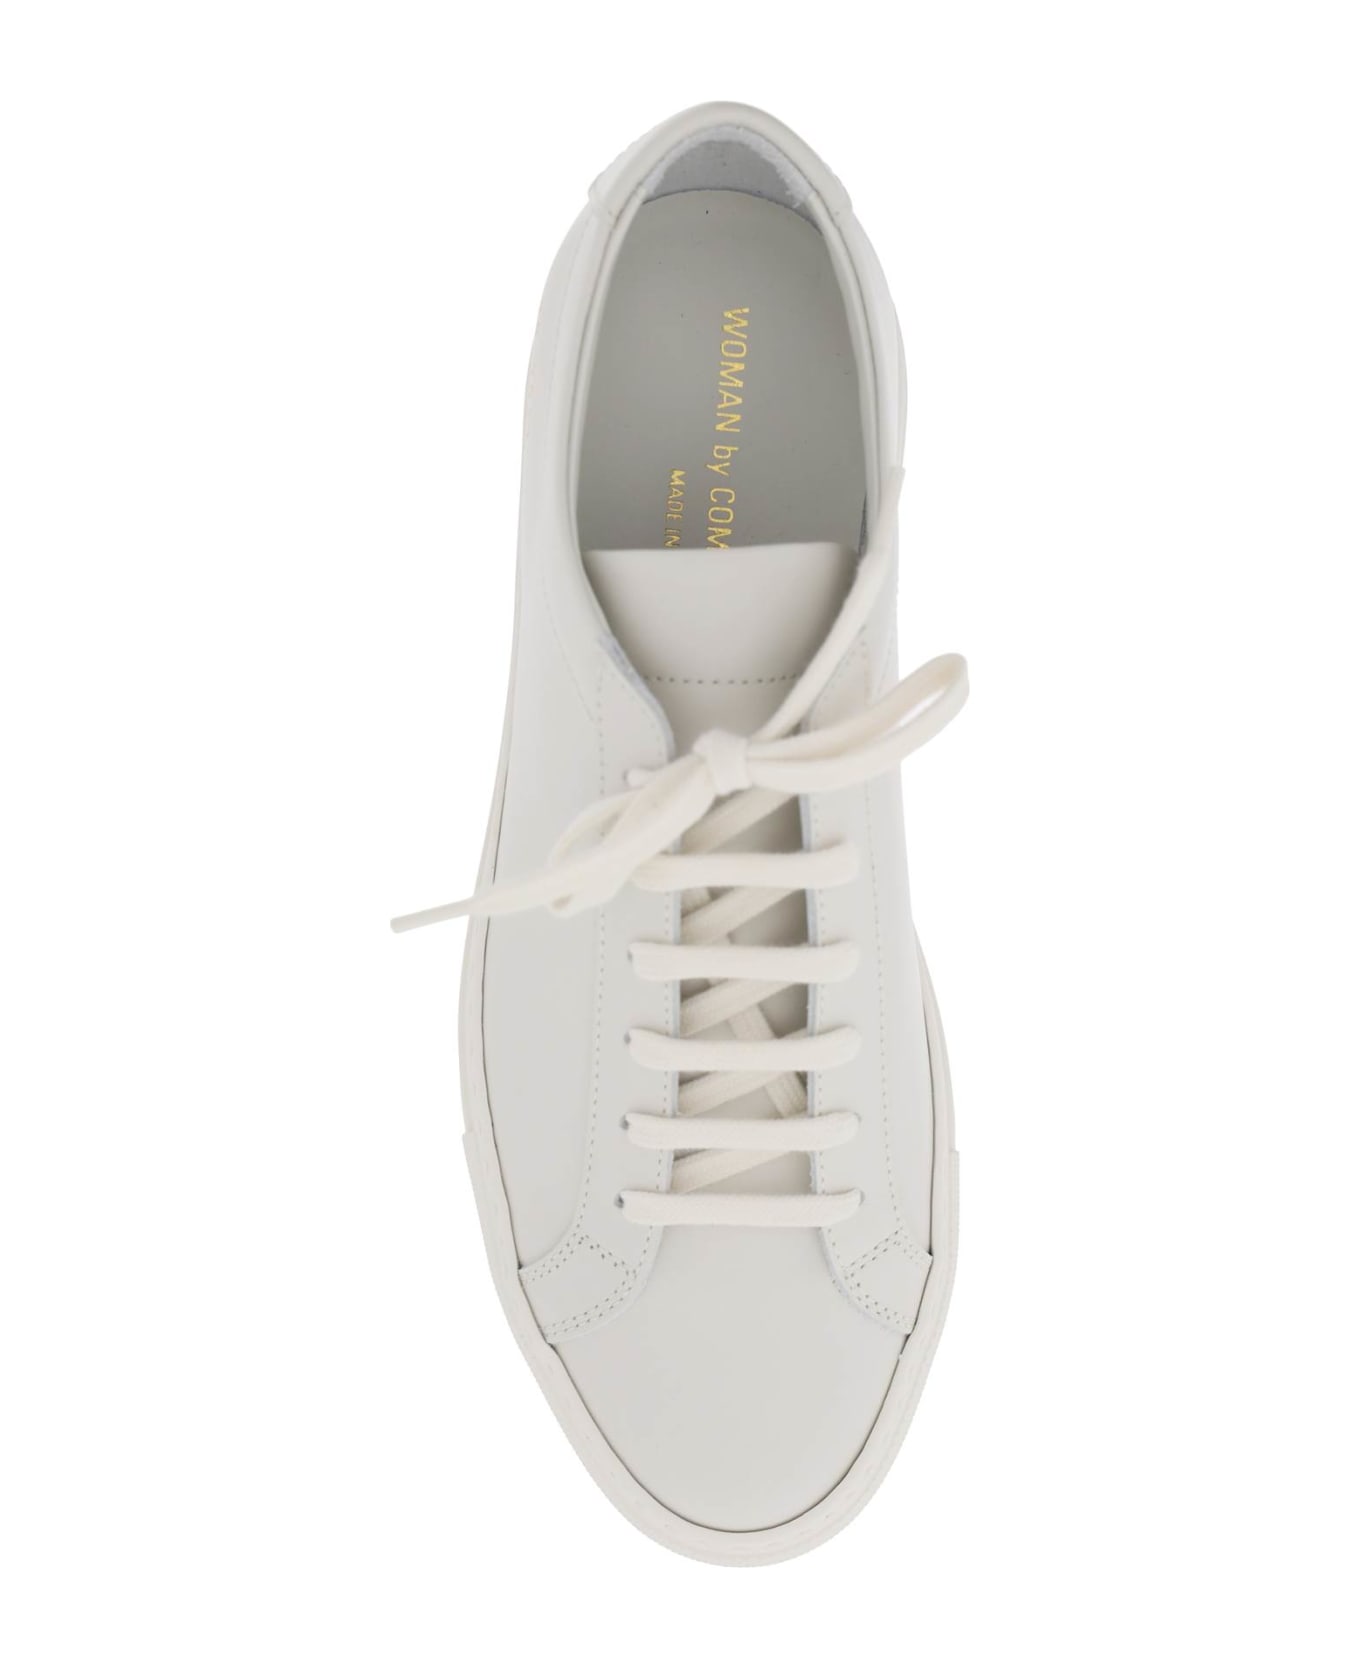 Common Projects Original Achilles Leather Sneakers - Warm white